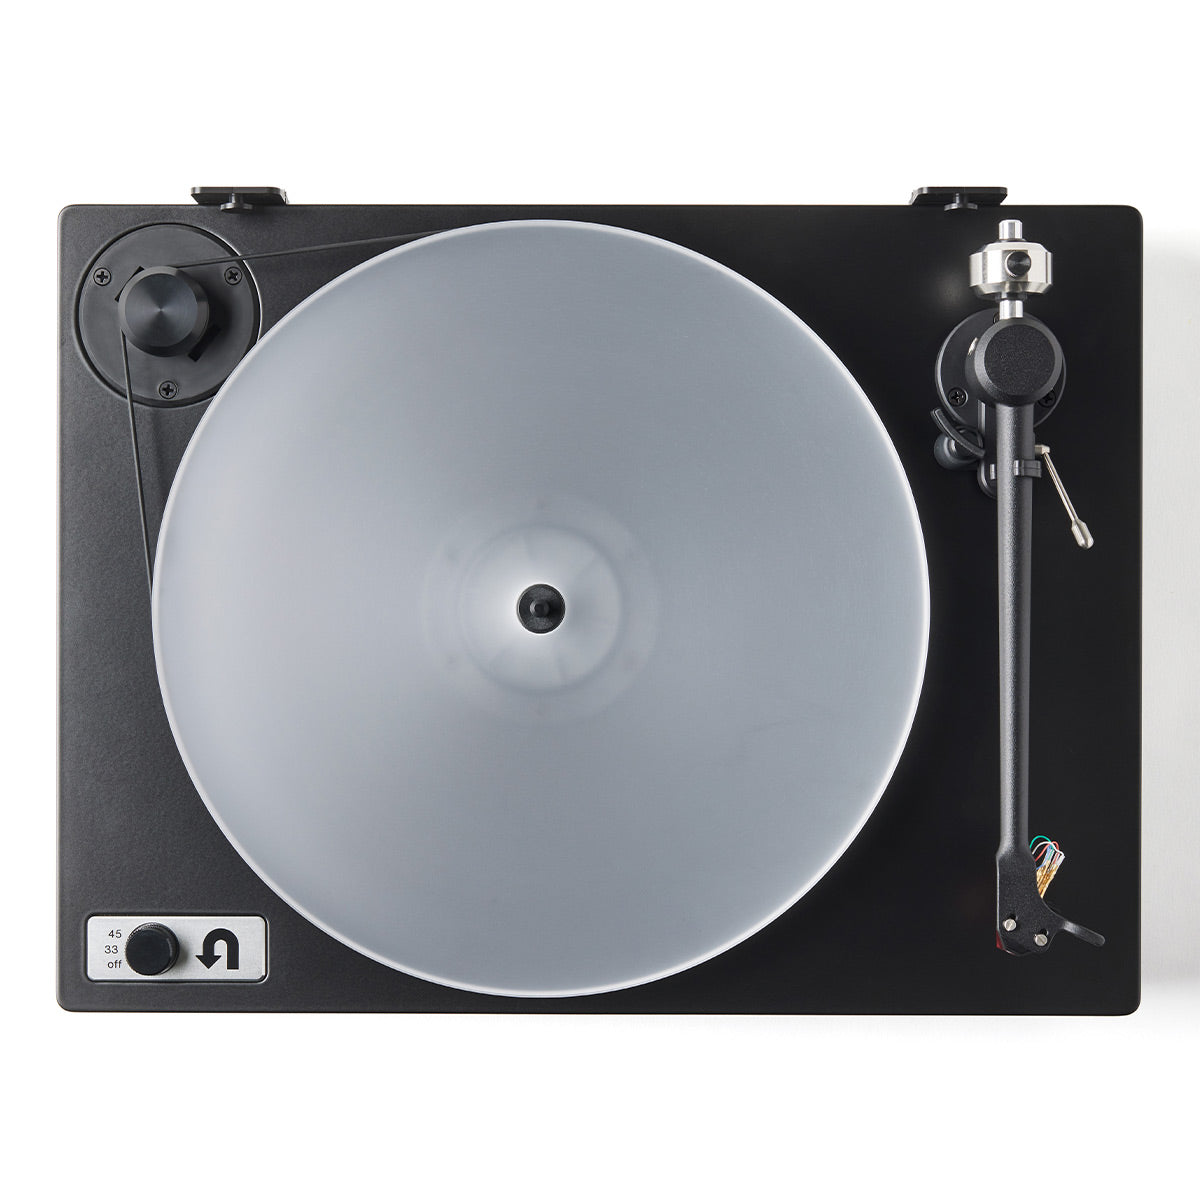 U-Turn Audio Orbit 2 Special Turntable with Built-In Preamp and Ortofon 2M Red Cartridge (Black)